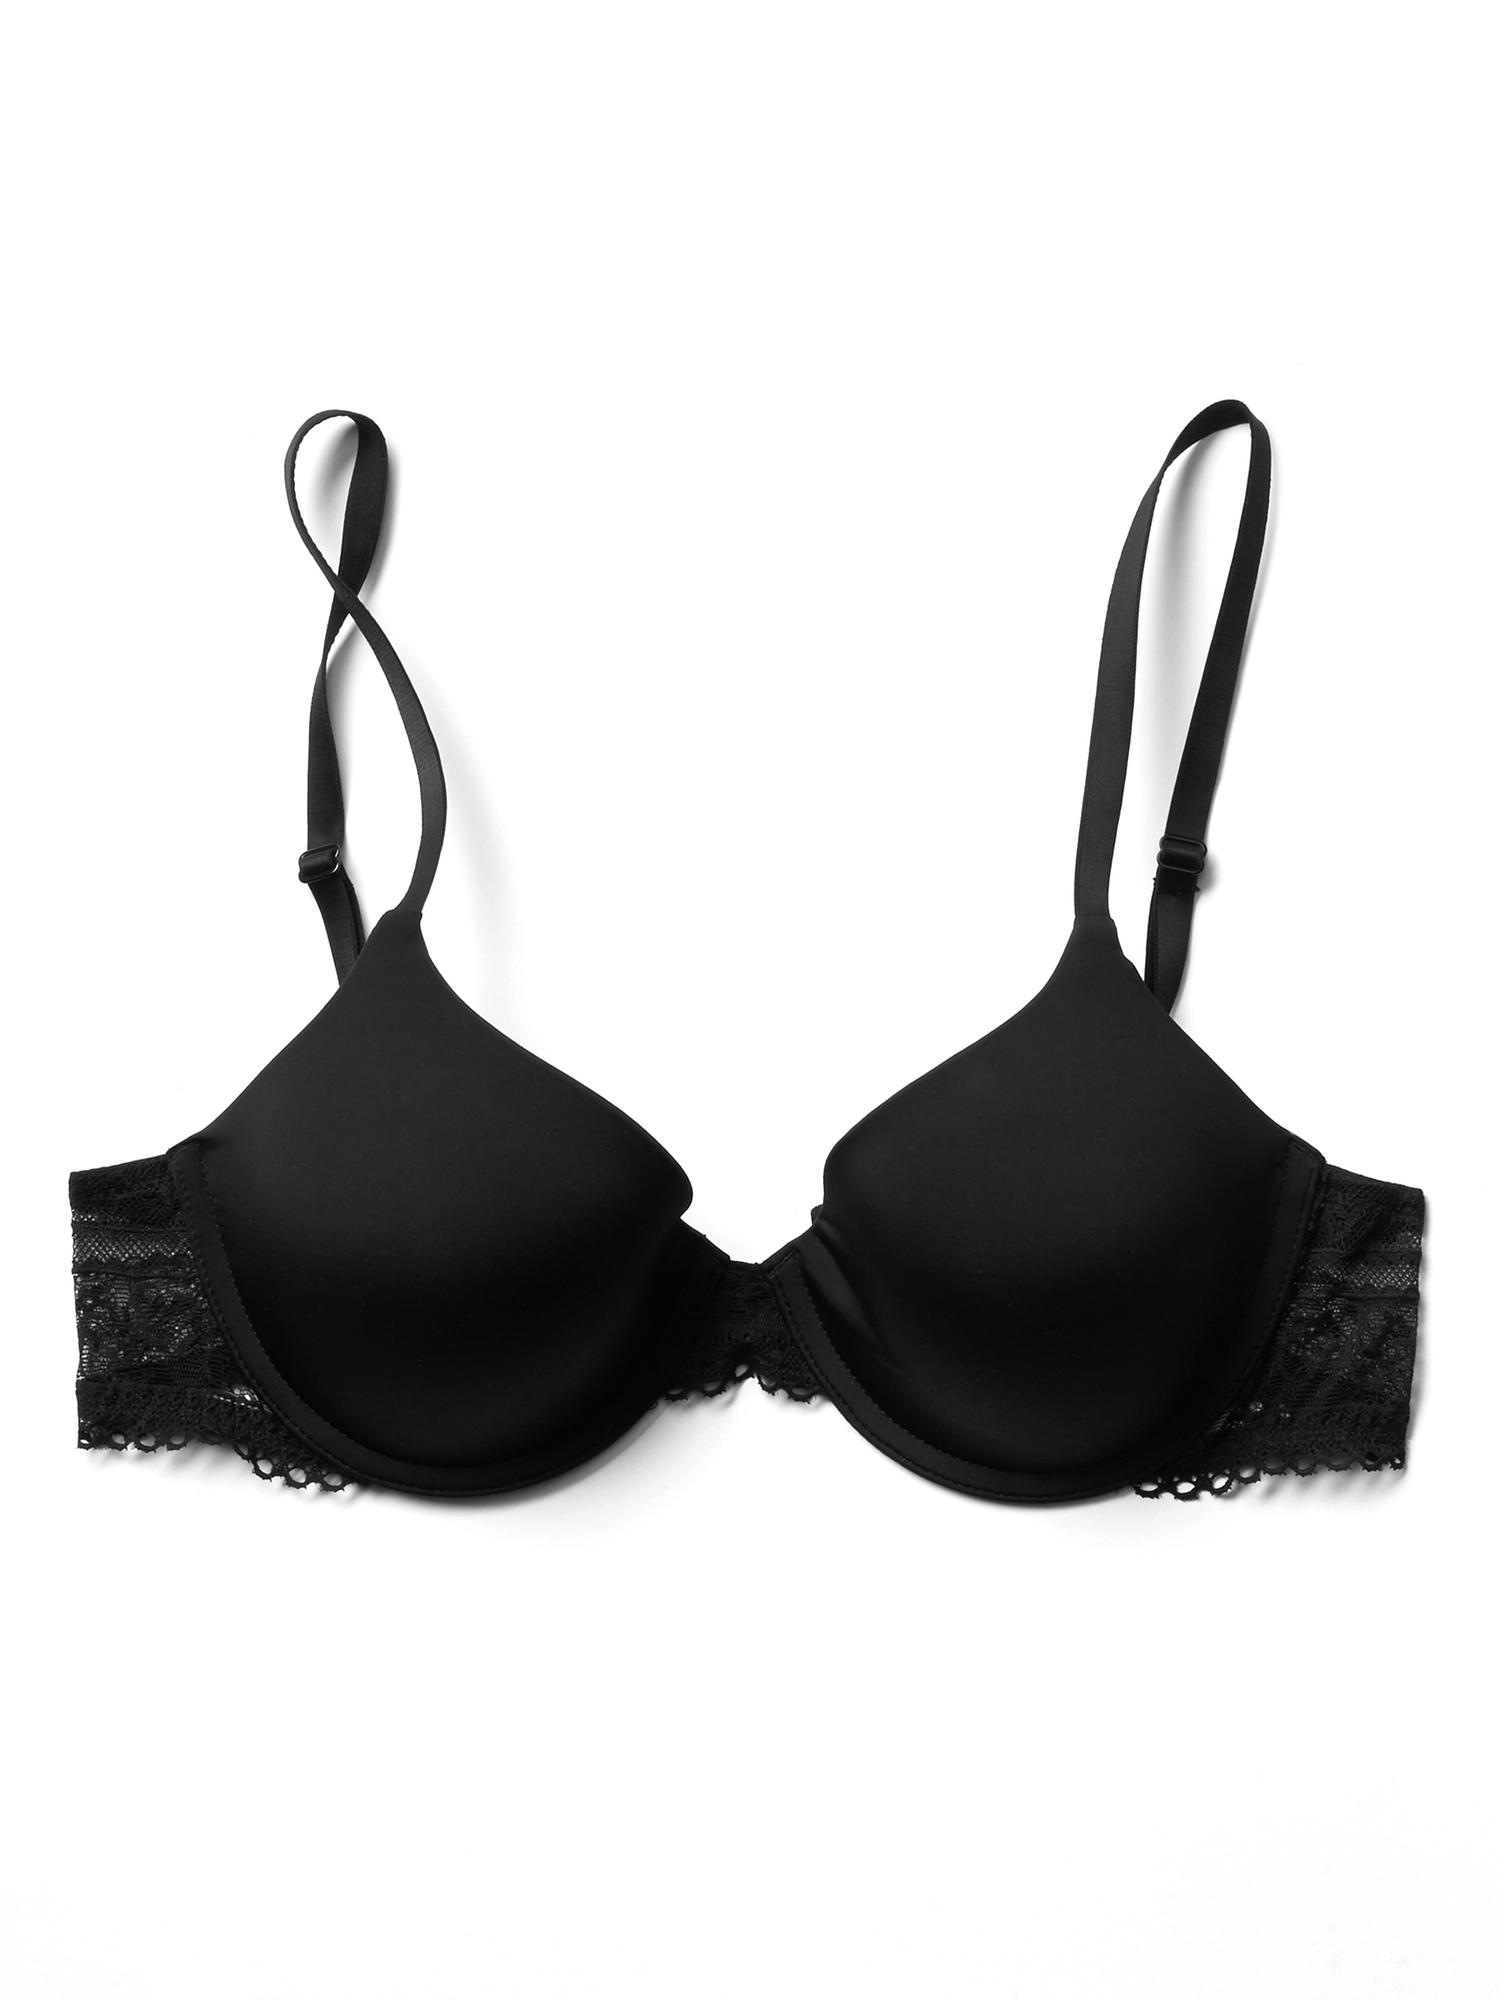 Shop Aerie Women's Lace Bras up to 60% Off